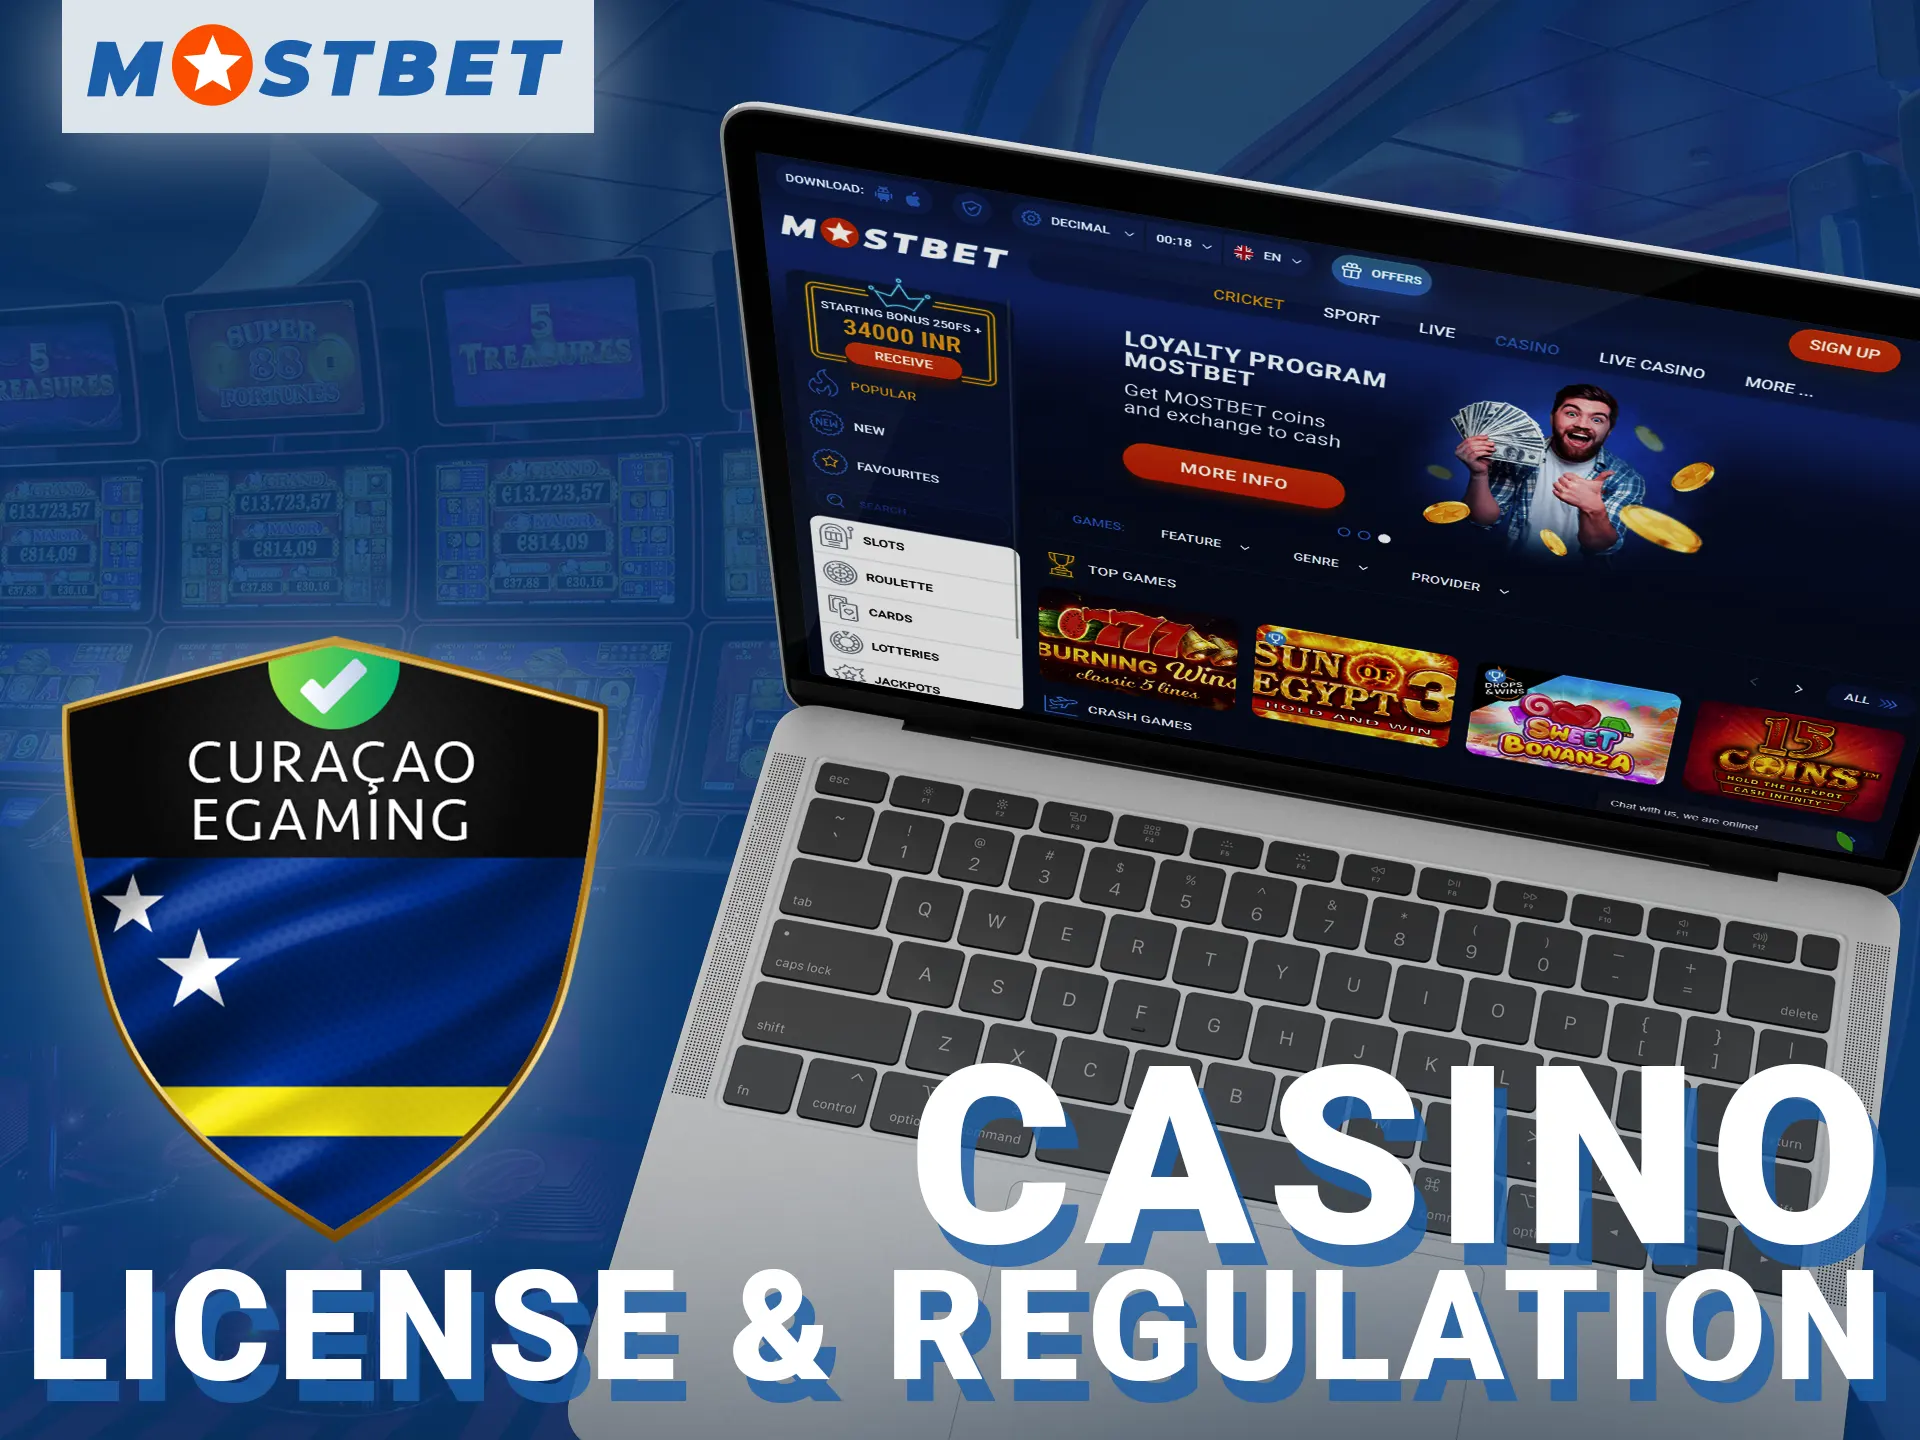 Mostbet proudly displays its Curaсao gaming licence.